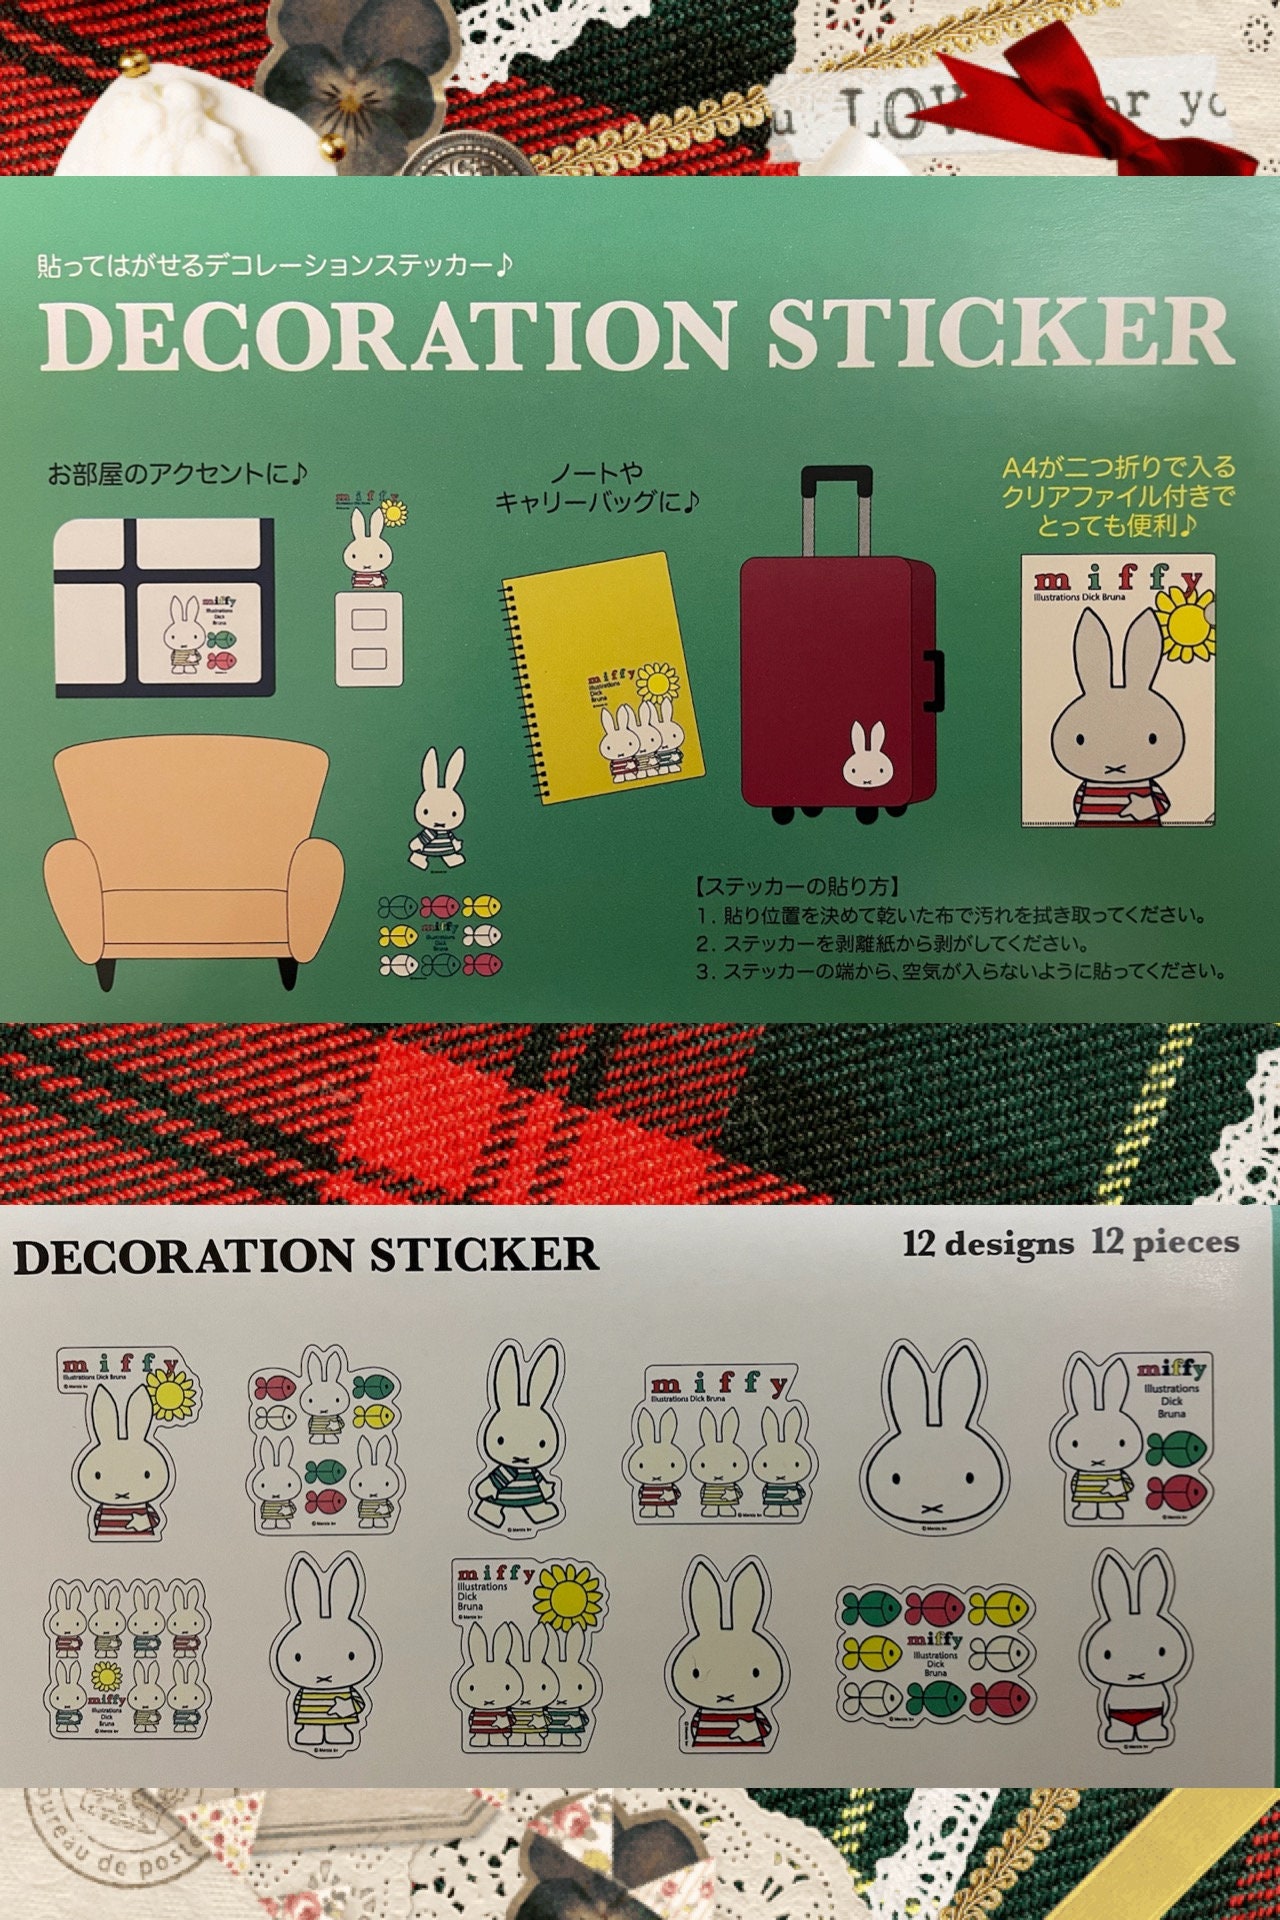 marge Belegering code Set of Big Miffy Cute Kawaii Stickers With Clear Folder - Etsy